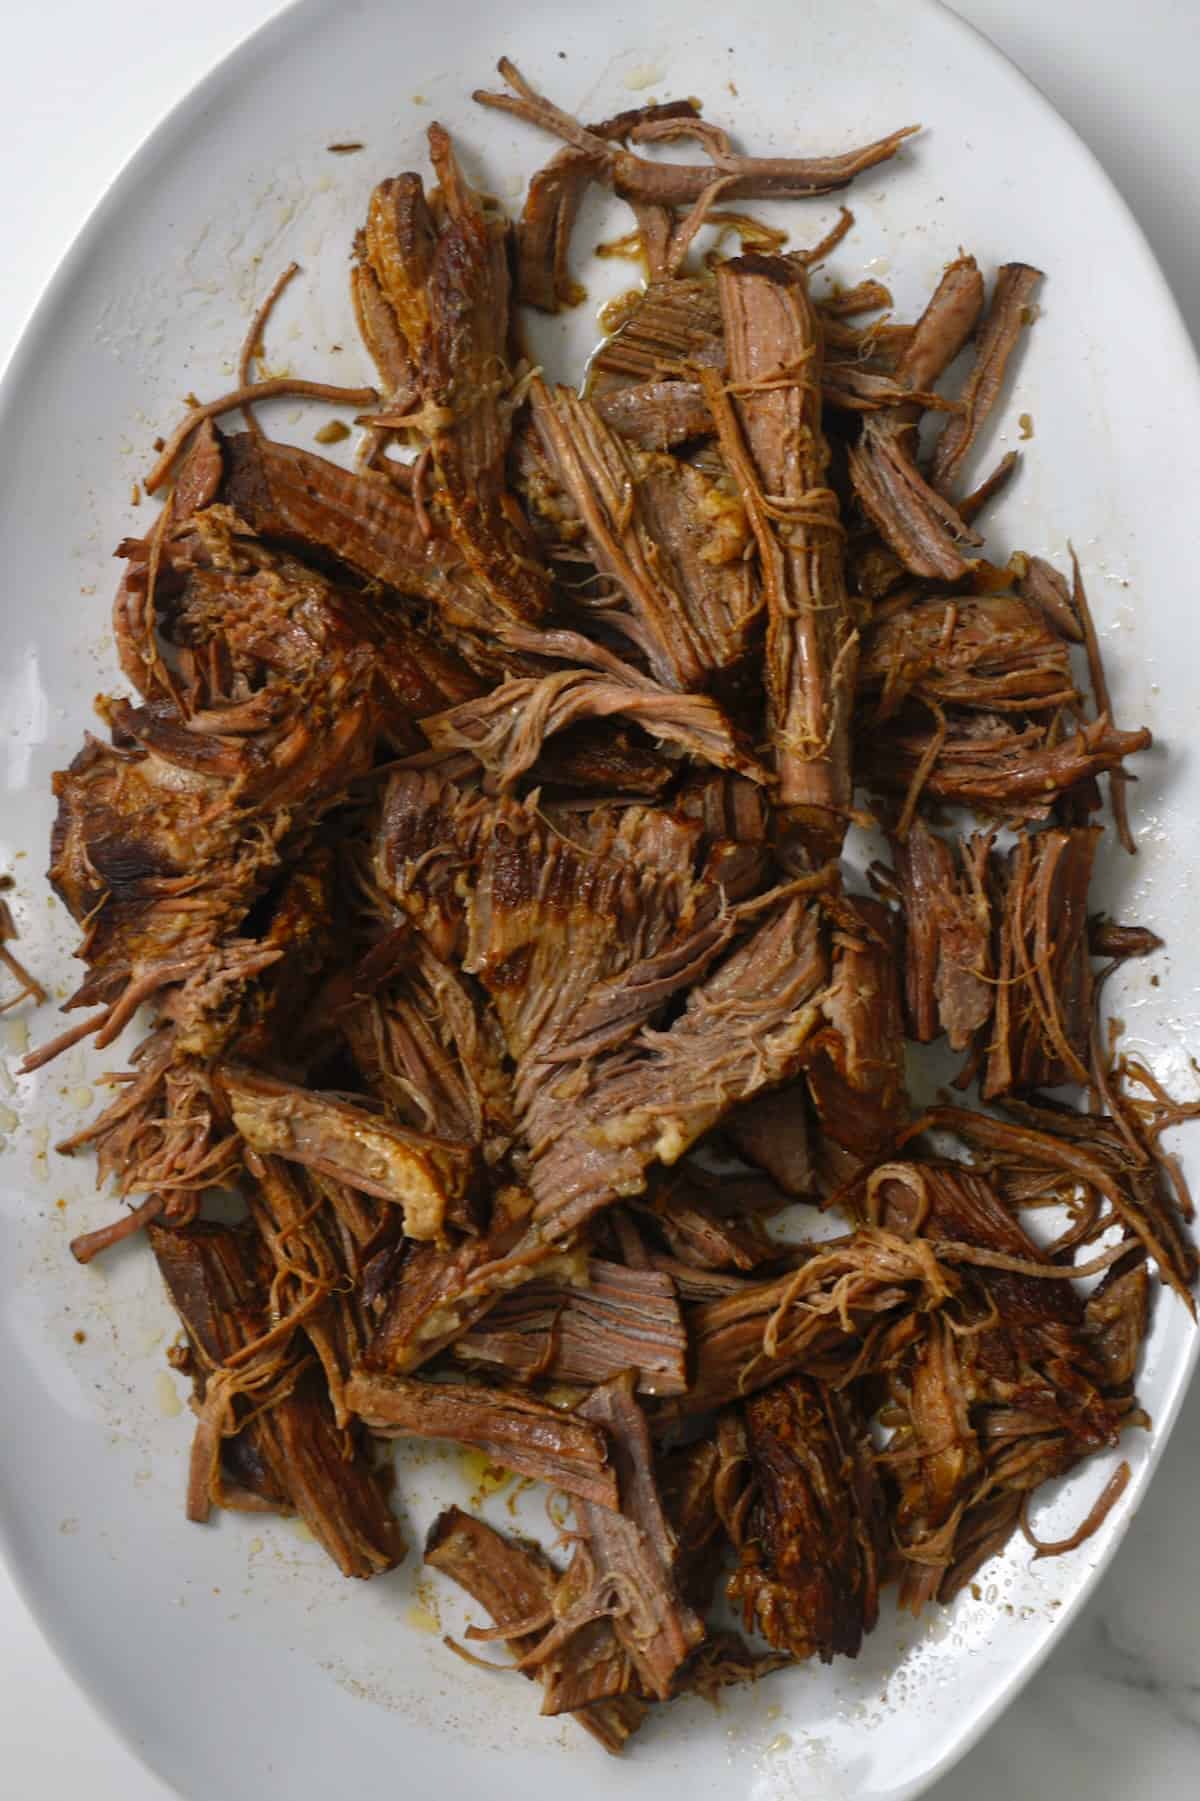 Shredded birria beef on a serving plate